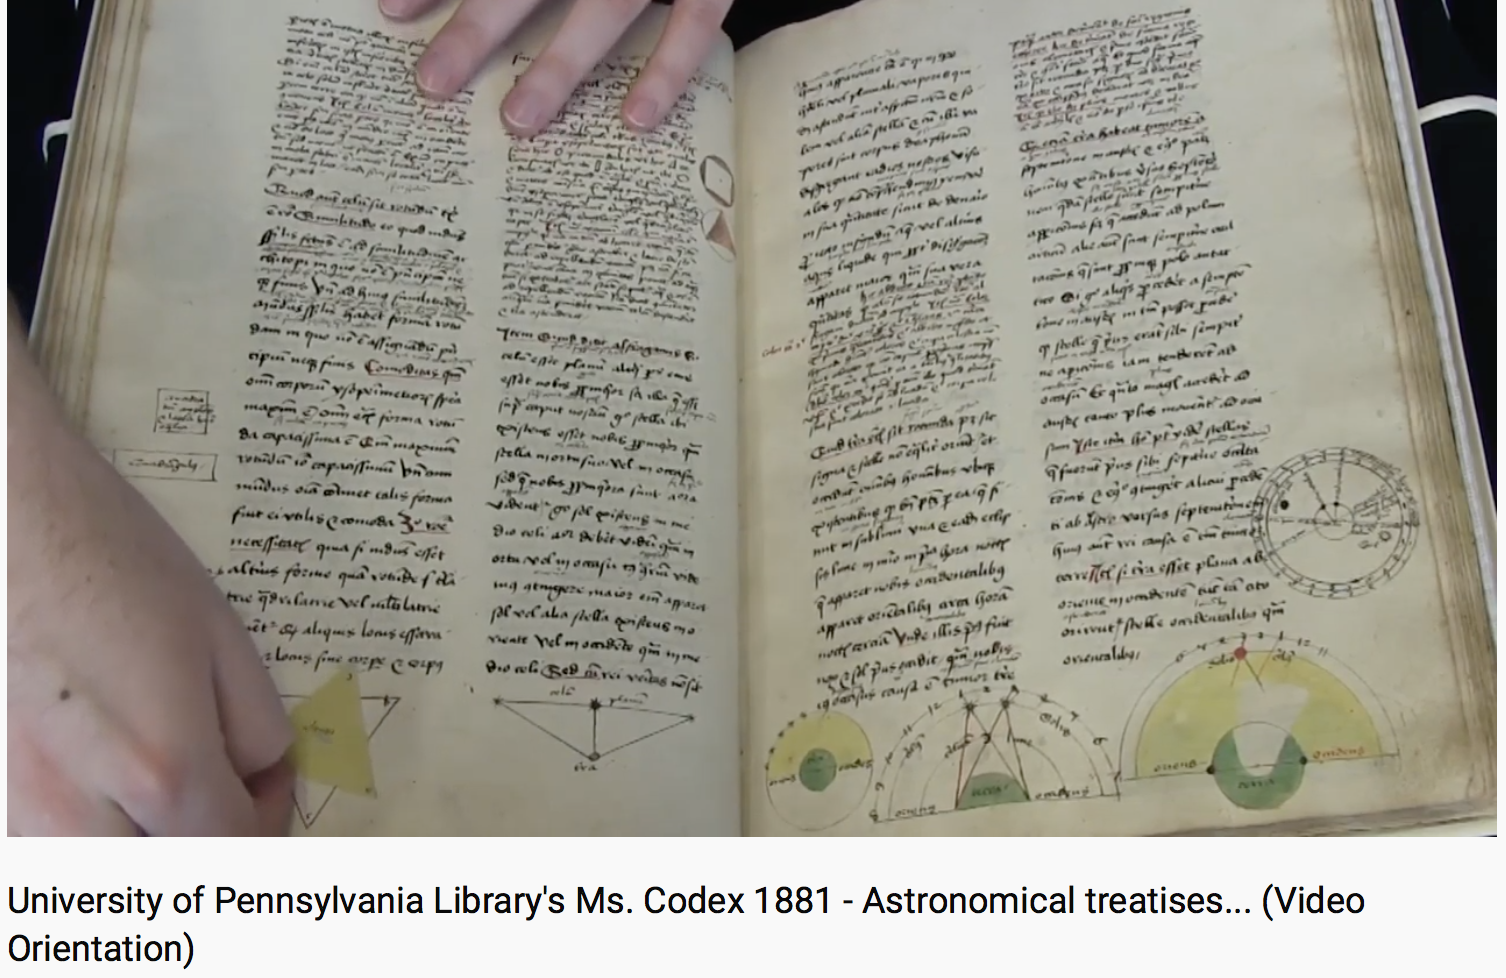 The Schoenberg Institute’s Curator of Manuscripts, Nicholas Herman, manipulates a volvelle in his video orientation to Kislak Center for Special Collections, Rare Books and Manuscripts, MS Codex 1881.